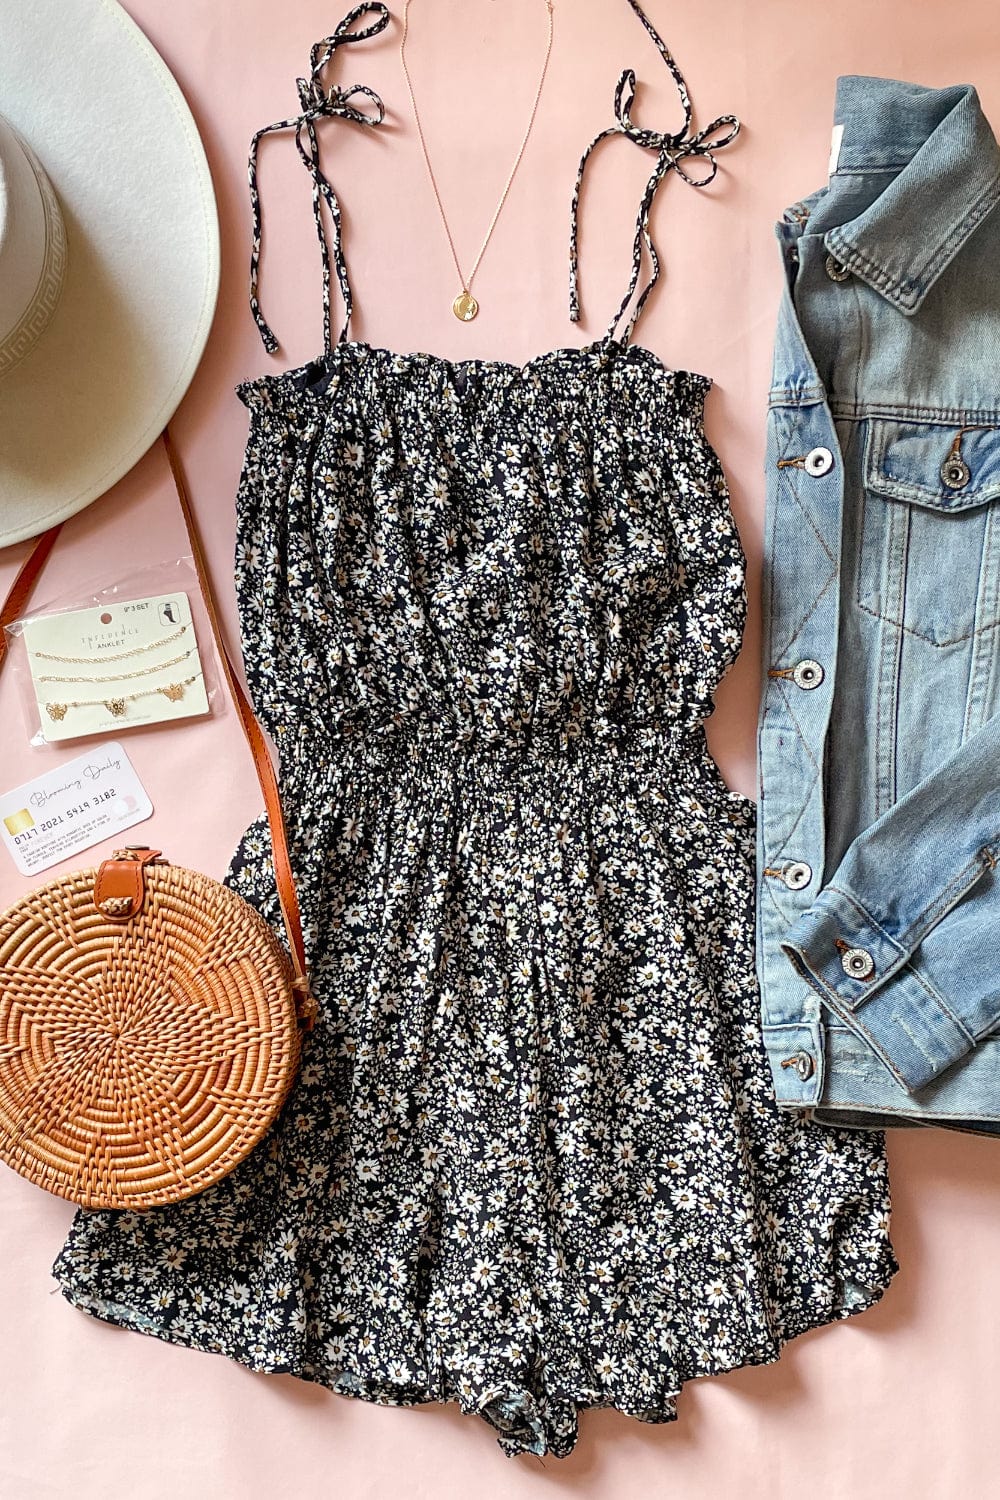 Buy a French Connection Womens Floral Romper Jumpsuit | Tagsweekly